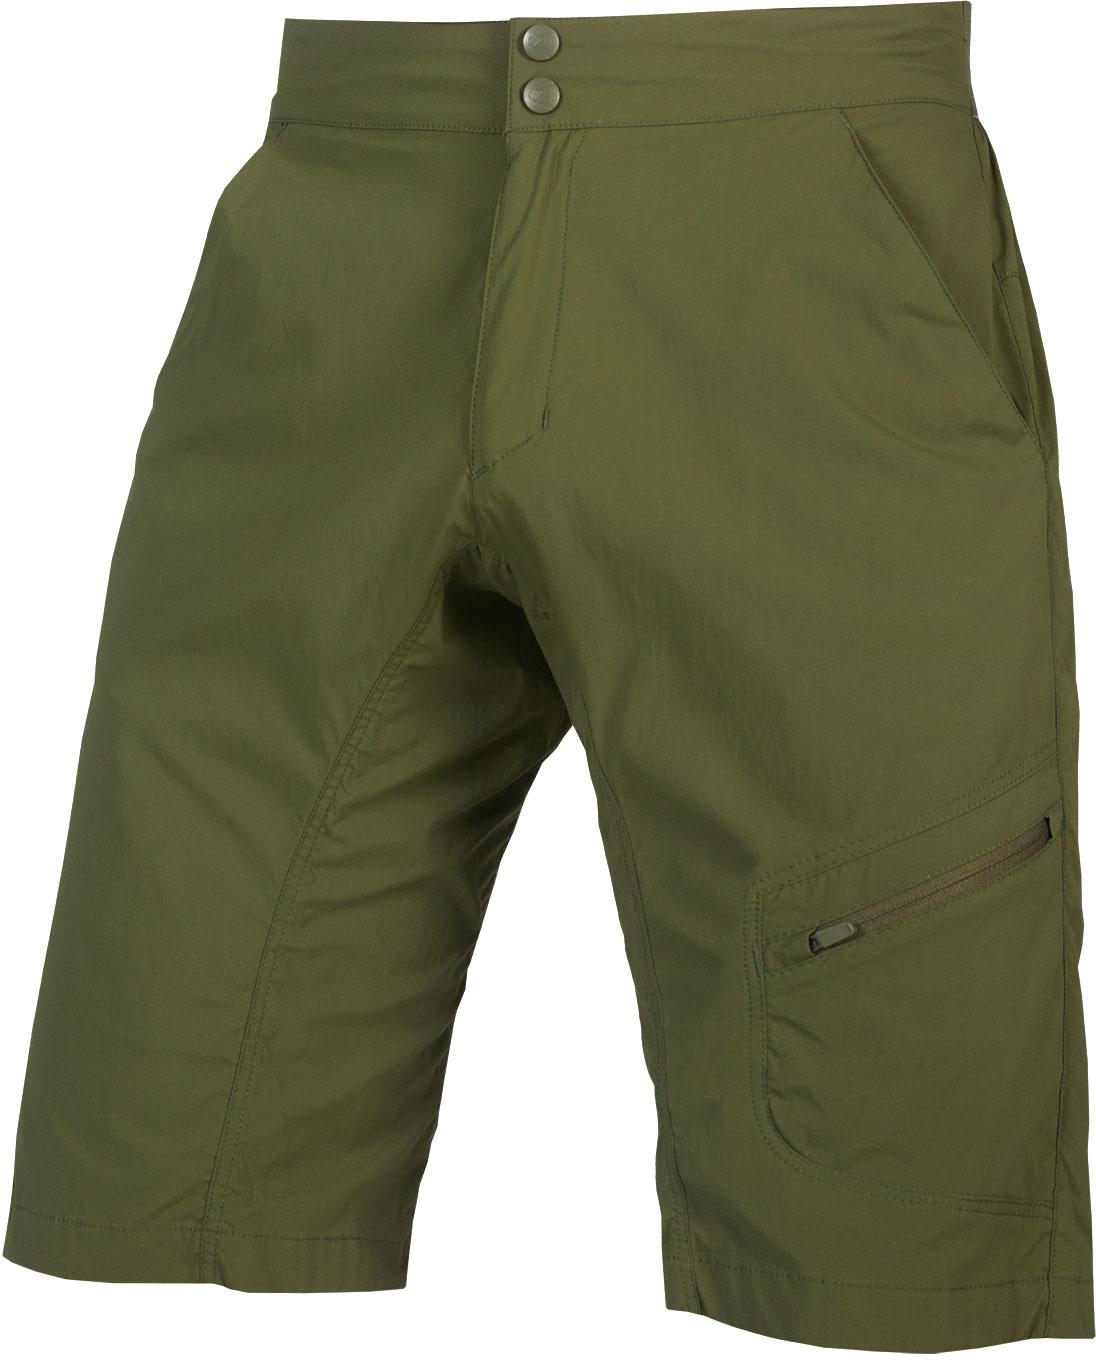 Endura Hummvee Lite Shorts With Liner  Olive Green